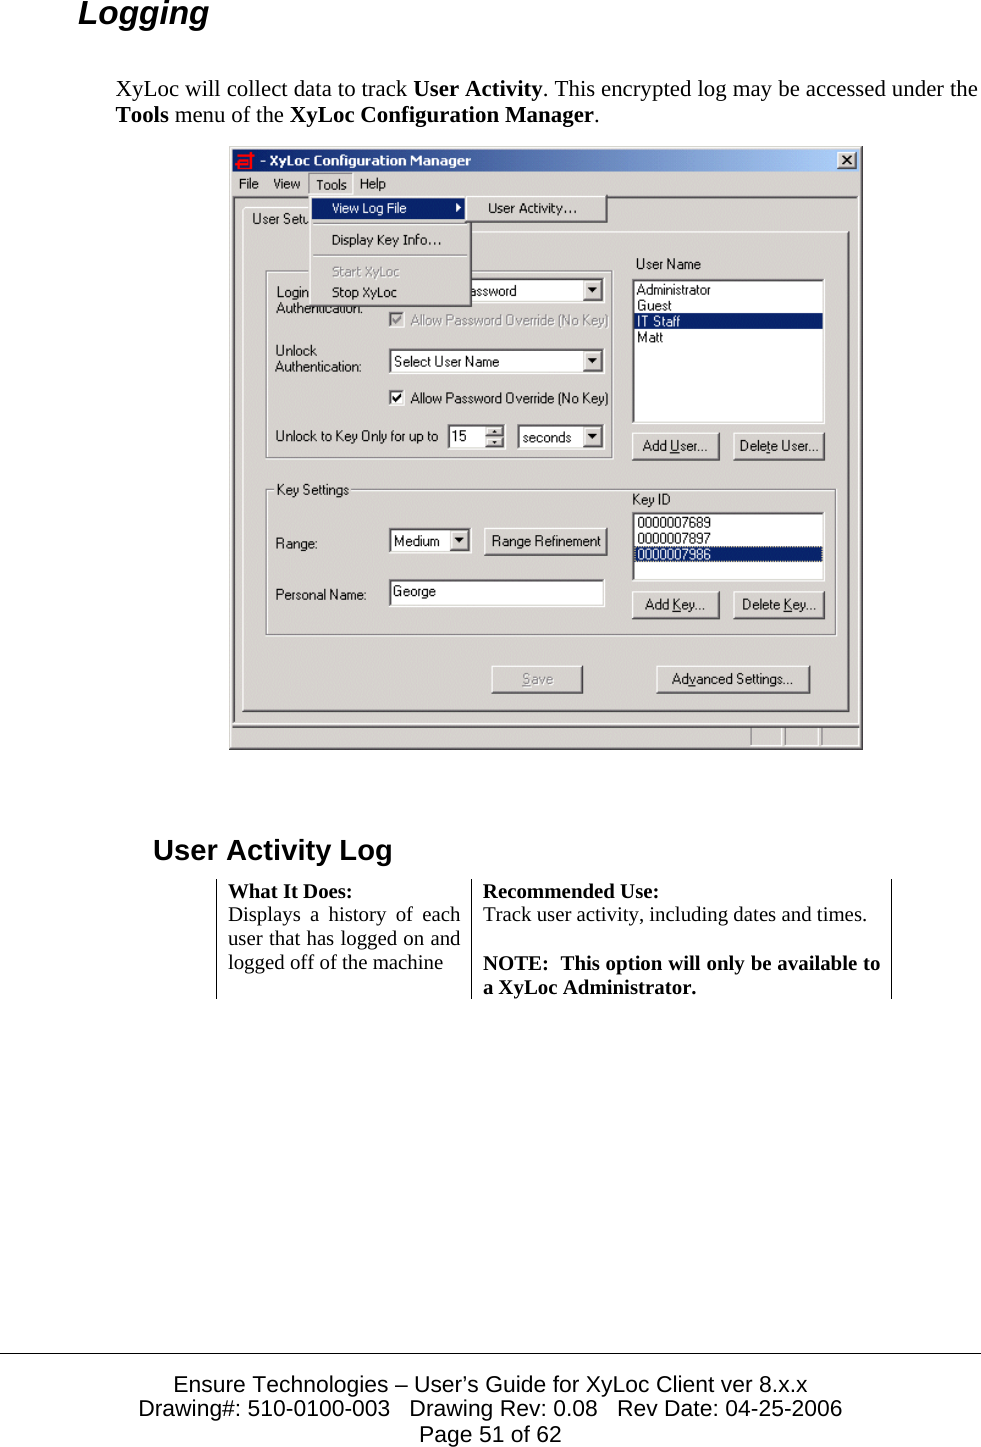  Ensure Technologies – User’s Guide for XyLoc Client ver 8.x.x Drawing#: 510-0100-003   Drawing Rev: 0.08   Rev Date: 04-25-2006 Page 51 of 62 Logging XyLoc will collect data to track User Activity. This encrypted log may be accessed under the Tools menu of the XyLoc Configuration Manager.   User Activity Log What It Does:  Recommended Use: Displays a history of each user that has logged on and logged off of the machine Track user activity, including dates and times.  NOTE:  This option will only be available to a XyLoc Administrator.  